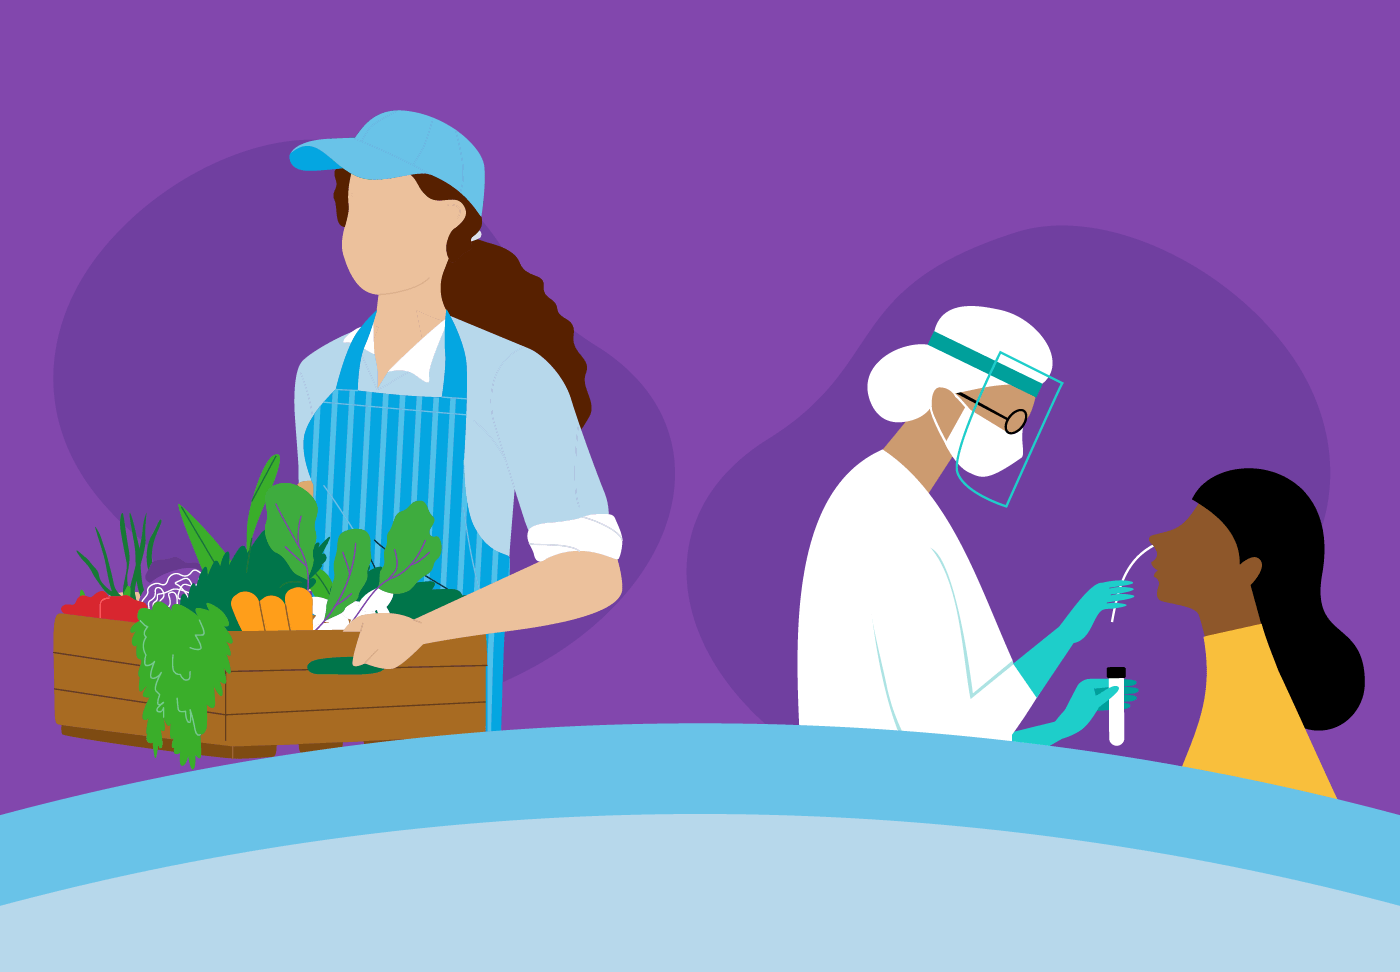 Illustration of someone with box of groceries, provider giving COVID-19 test